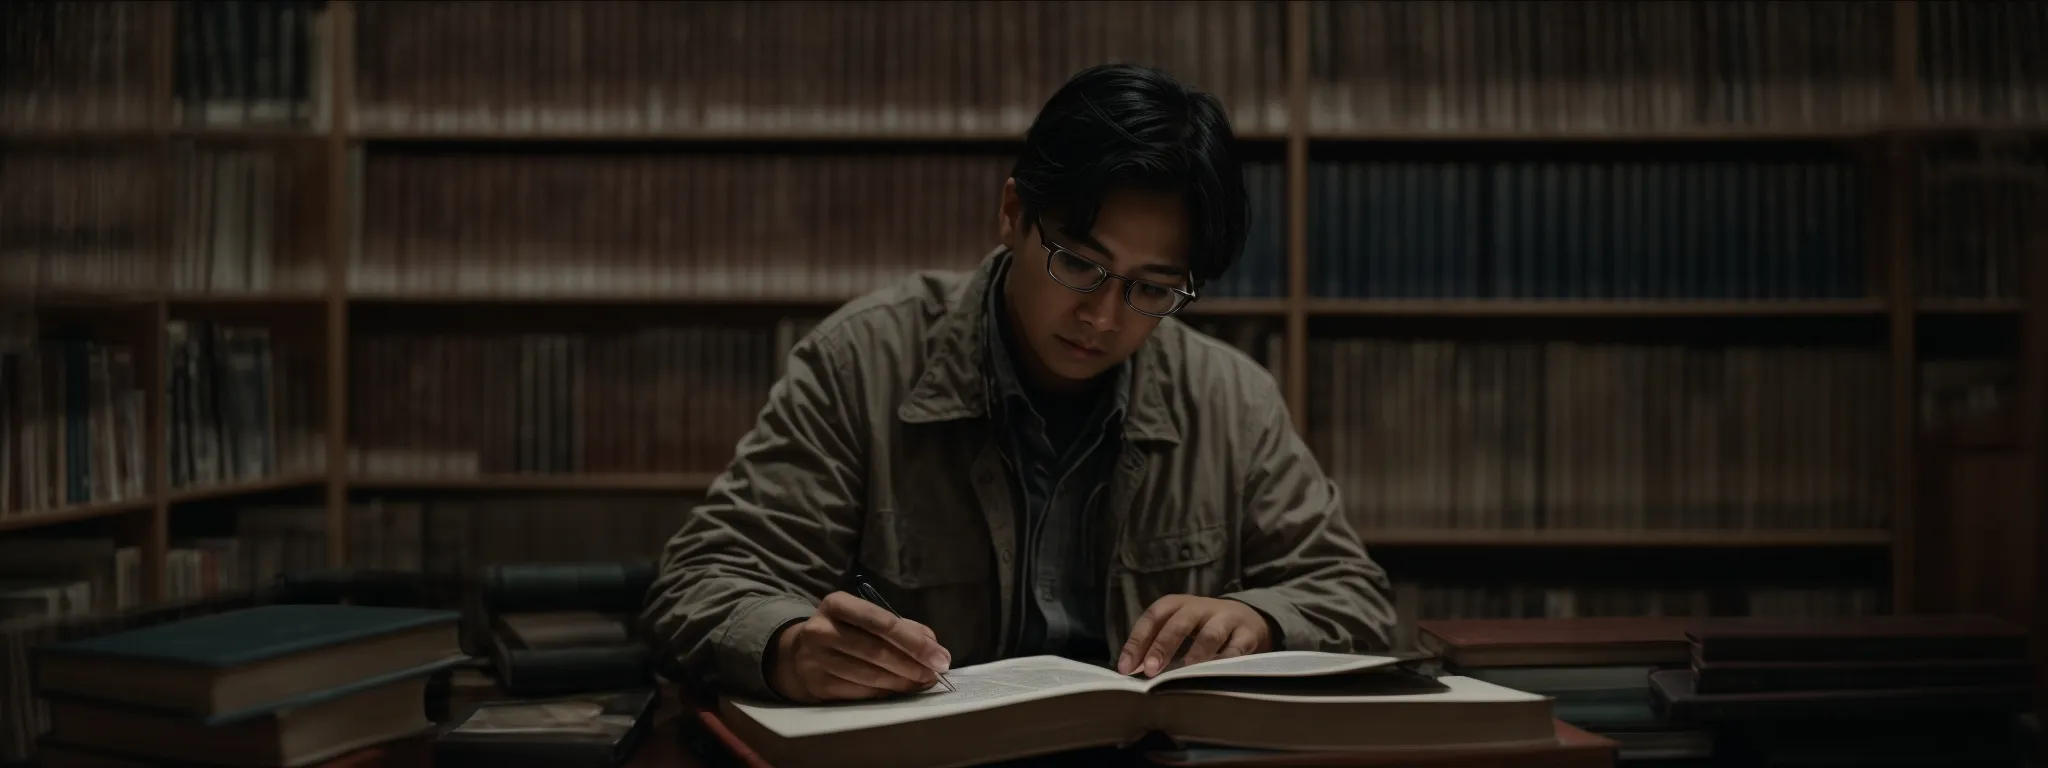 a diligent researcher intensely scrutinizes a thick book in a well-lit, quiet library.